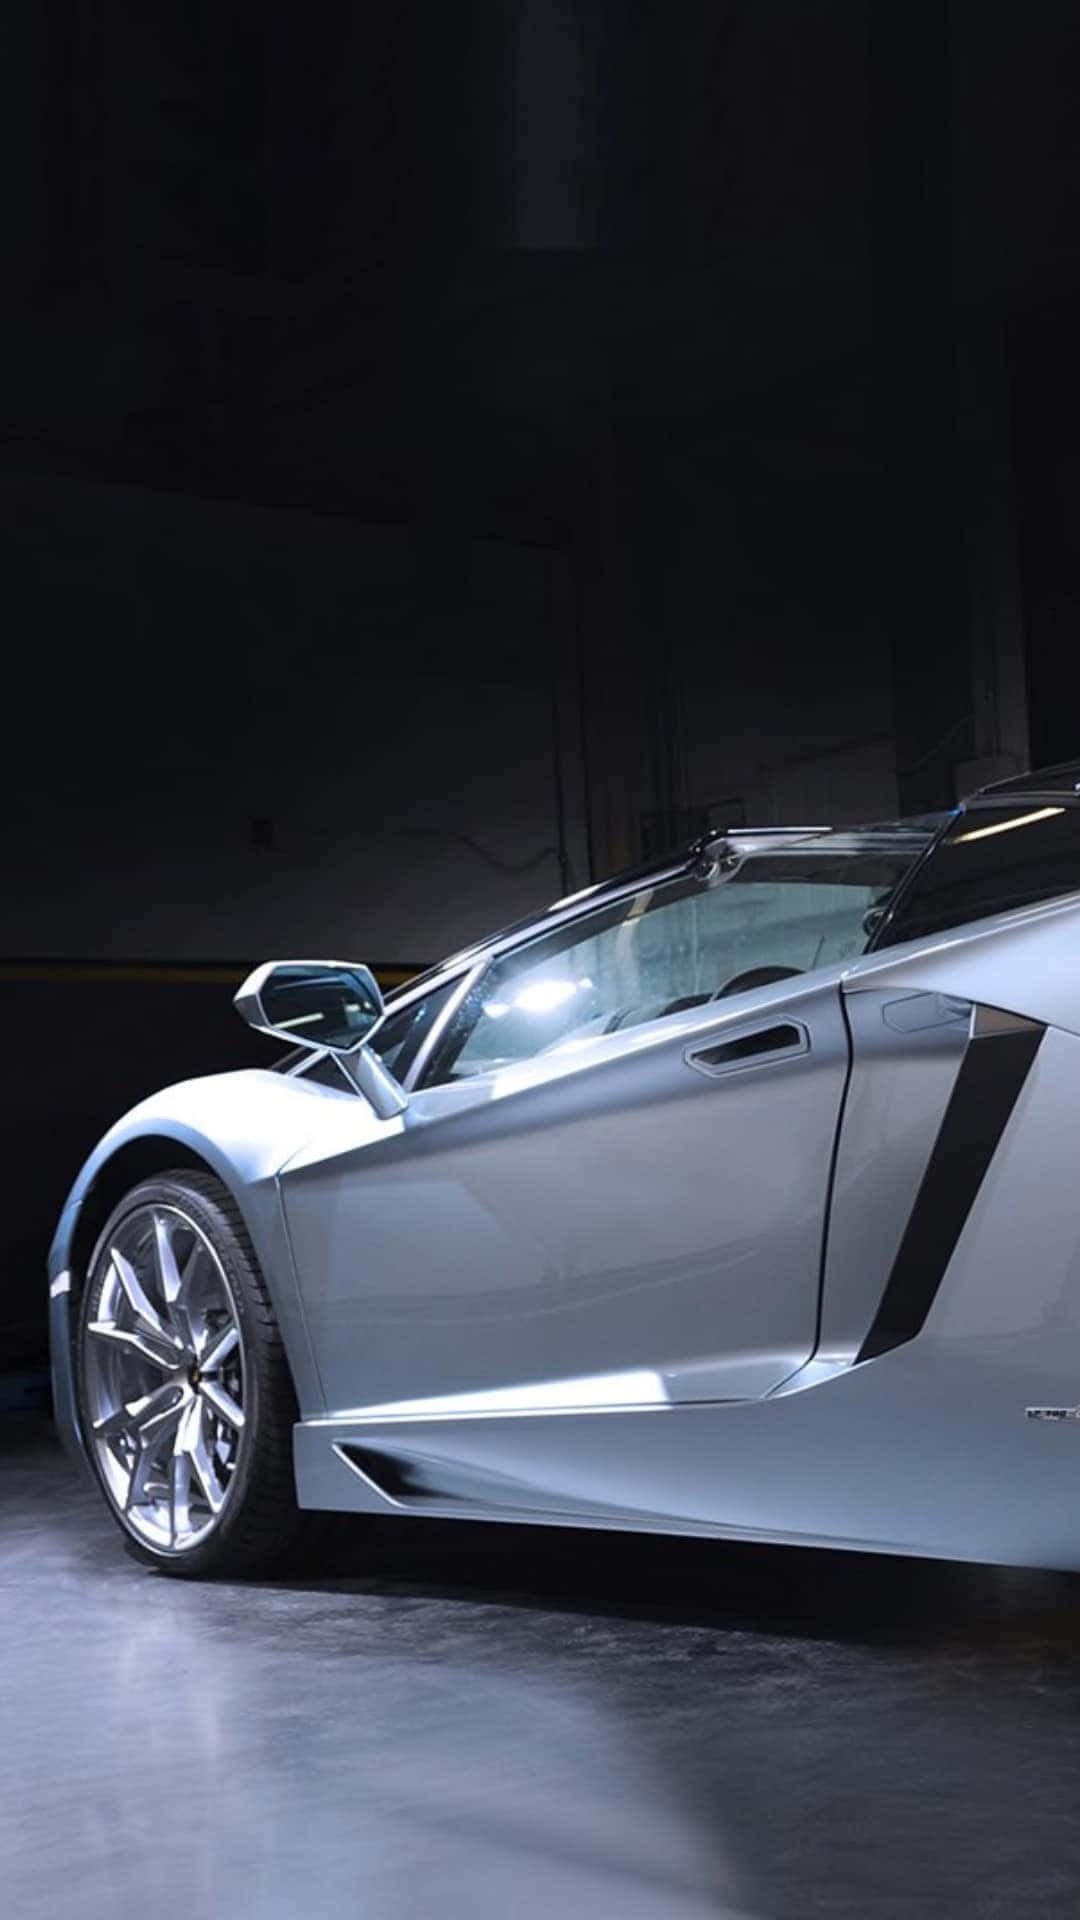 A Silver Sports Car Is Parked In A Dark Room